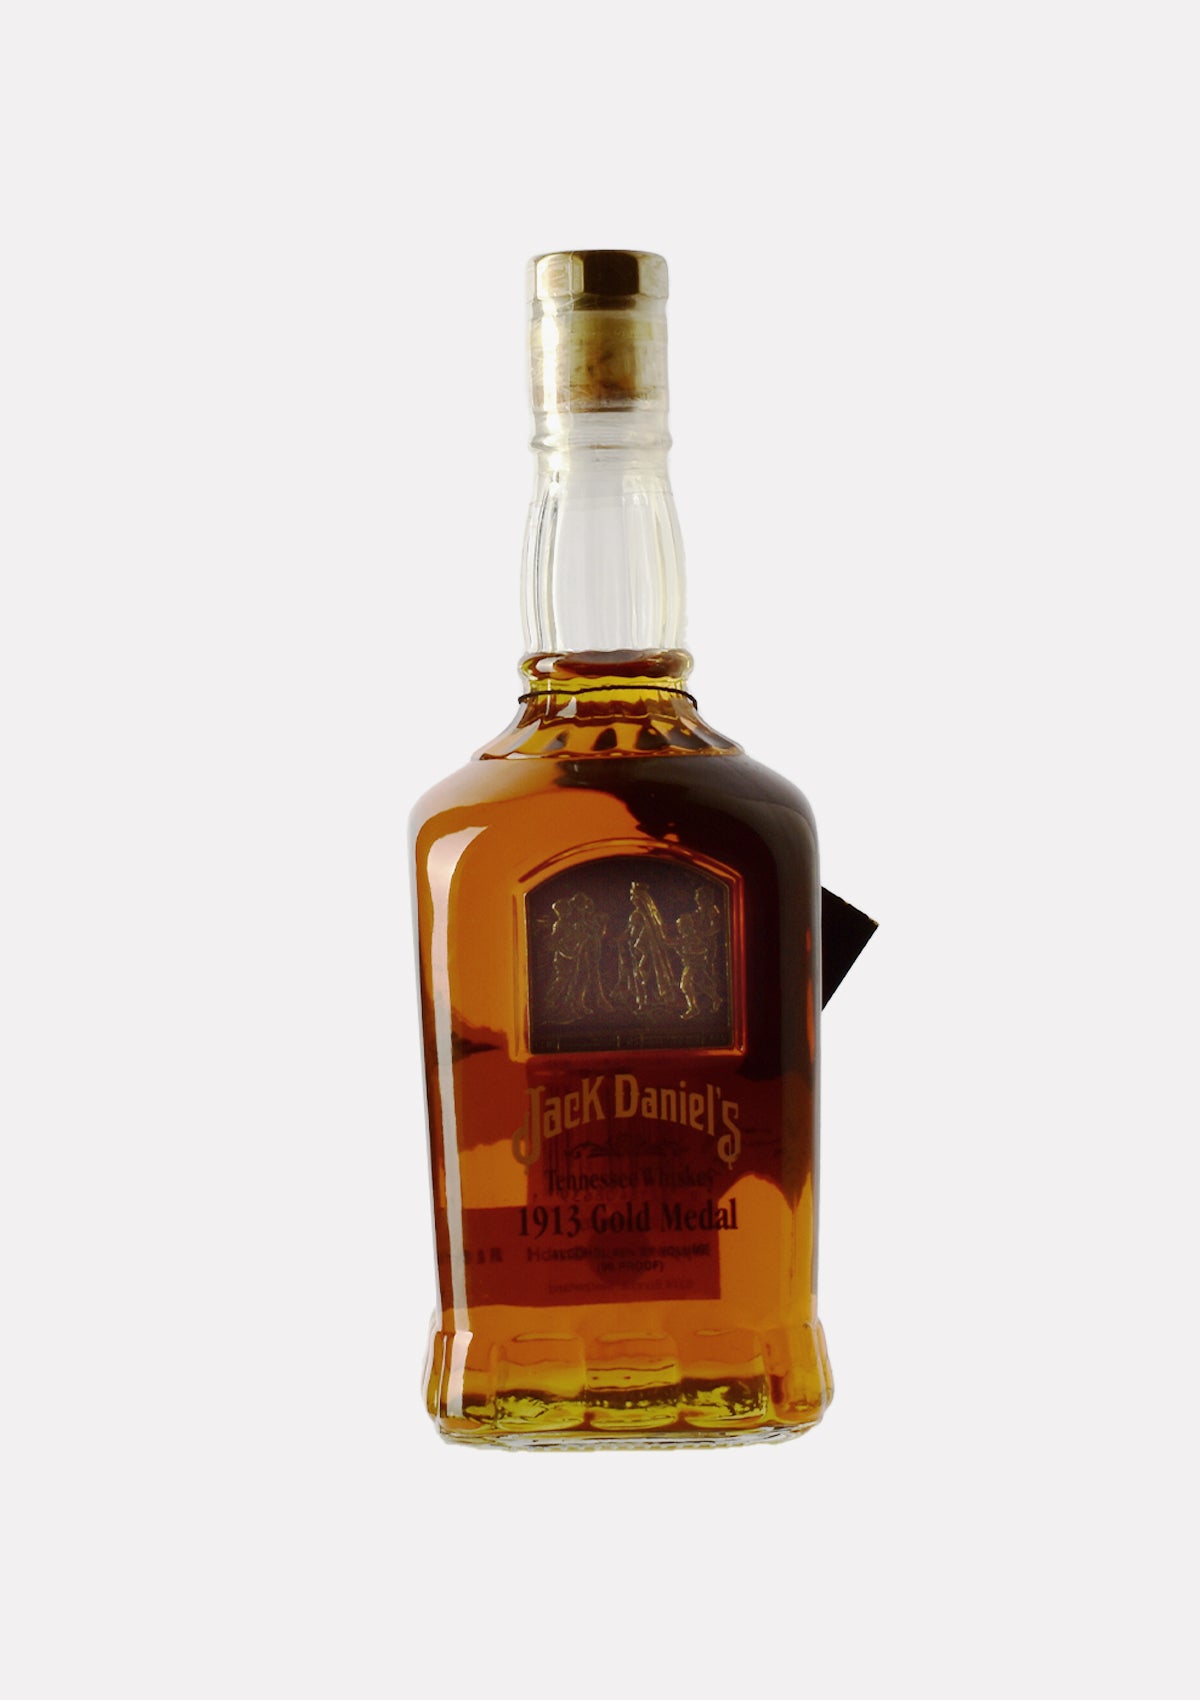 Jack Daniel`s Tennessee Whiskey 1913 Gold Medal